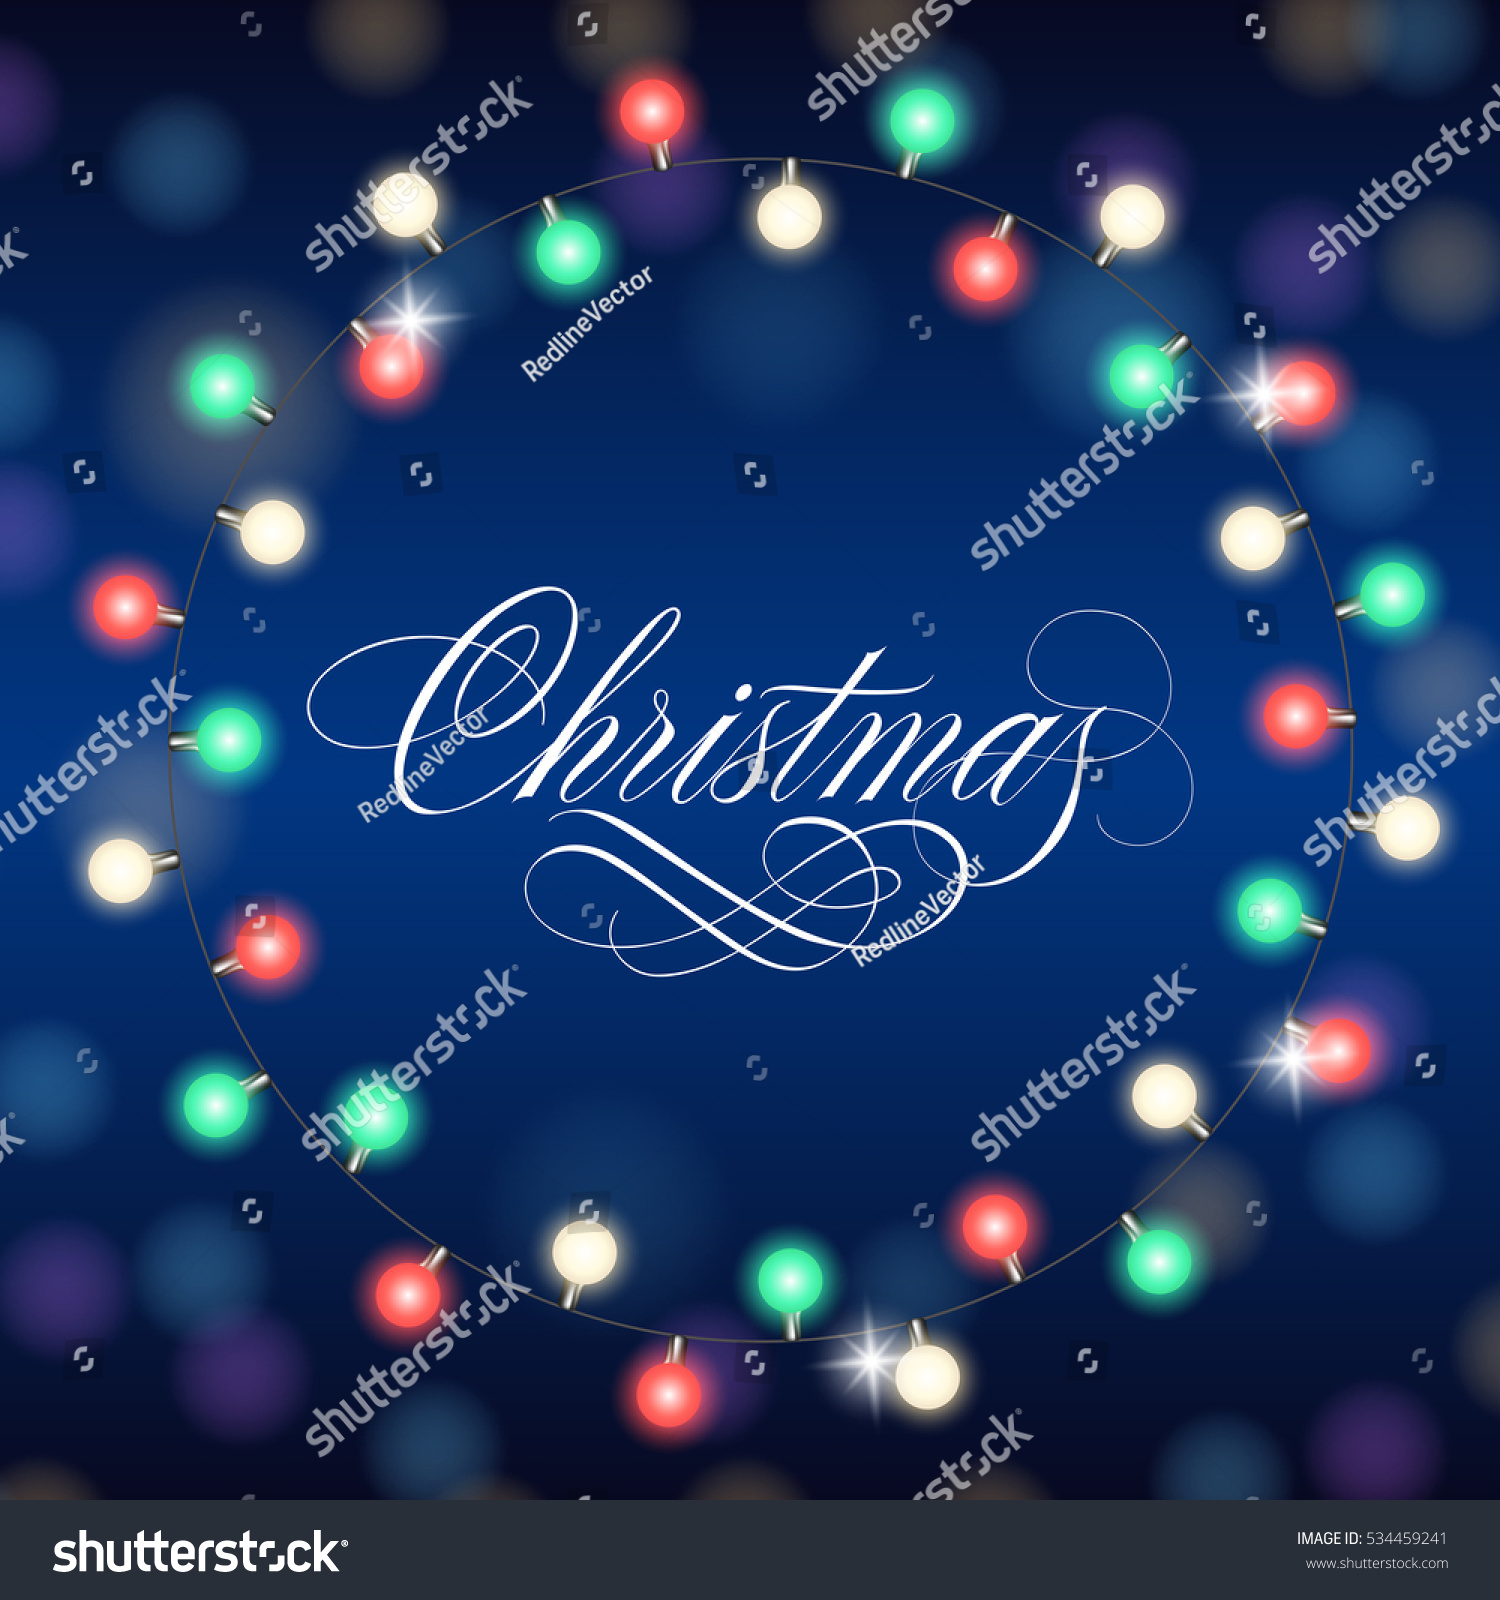 Christmas Lettering With Lights Garland Stock Vector Illustration ...